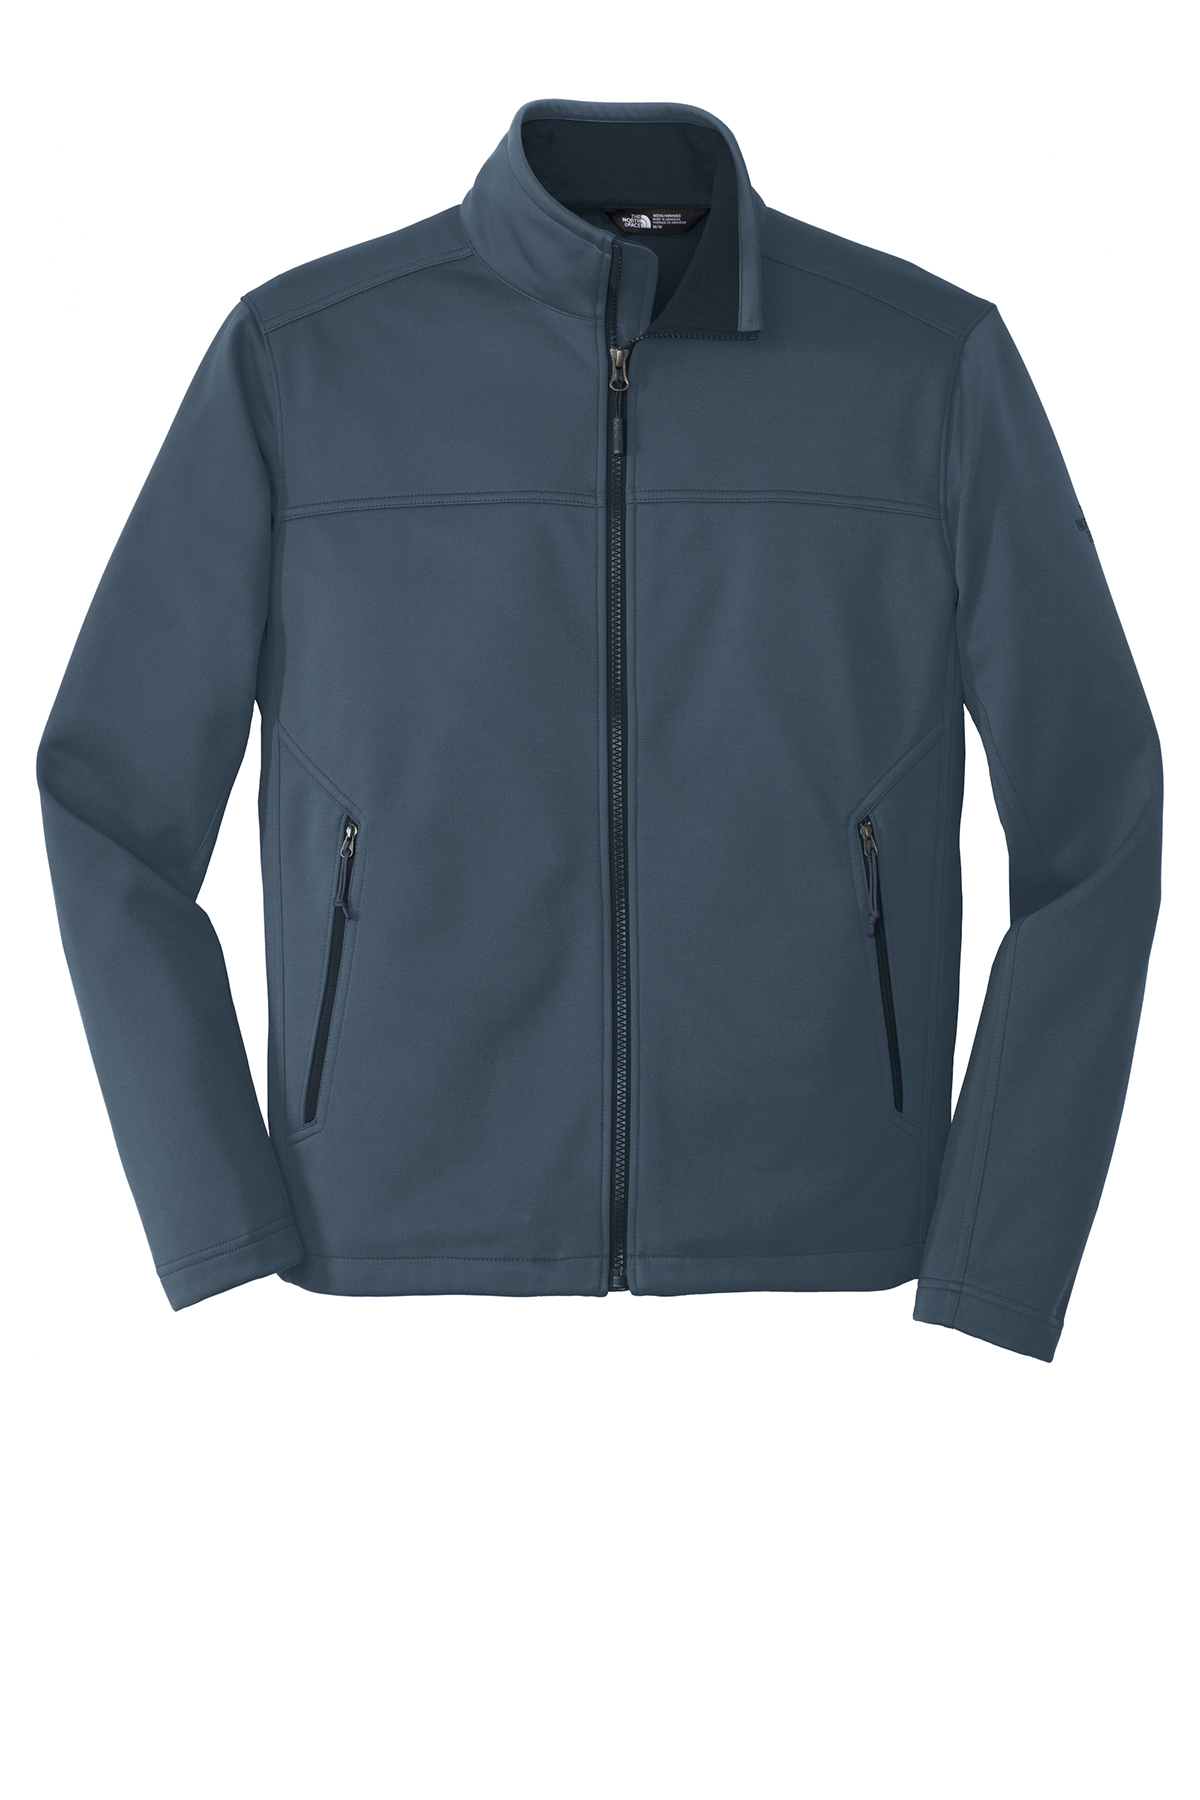 The North Face ® Ridgewall Soft Shell Jacket | Product | SanMar